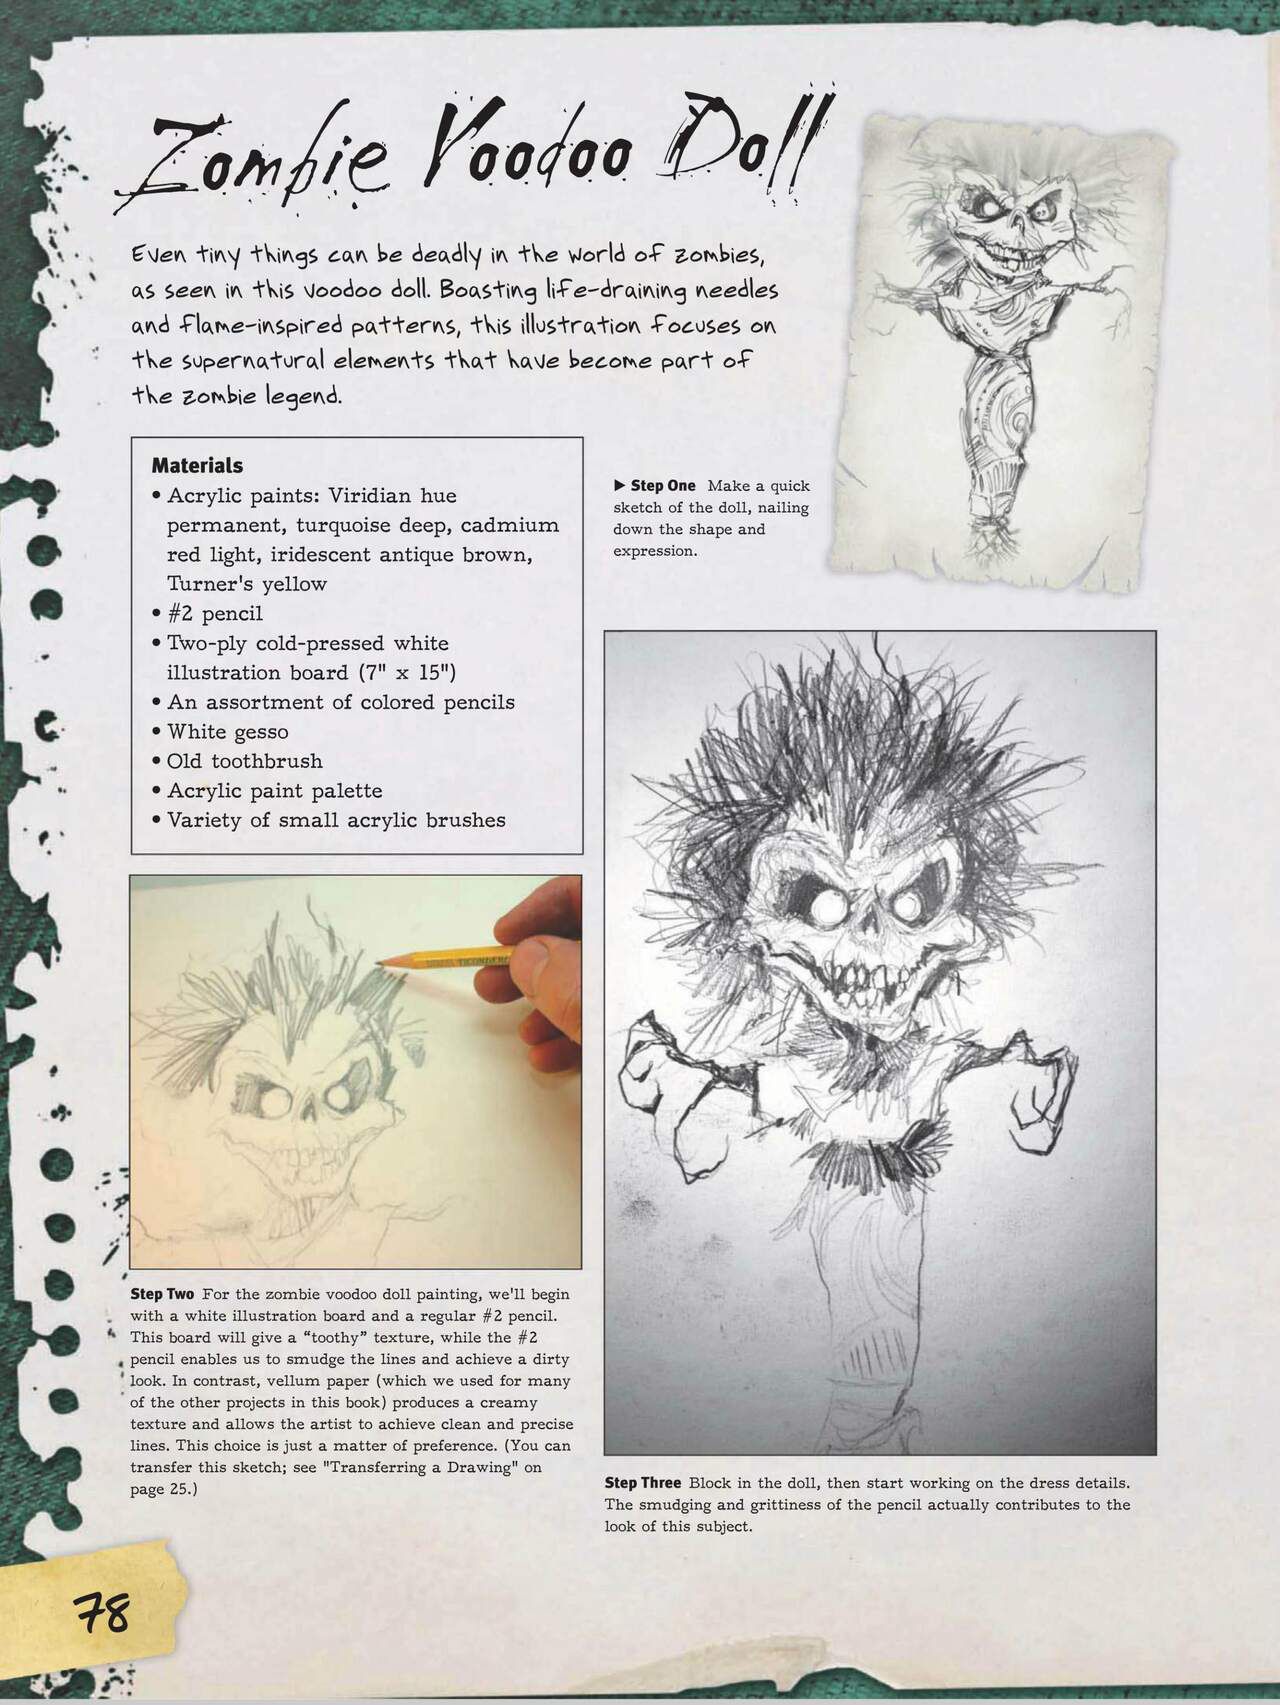 How to Draw Zombies: Discover the secrets to drawing, painting, and illustrating the undead 僵尸描绘集 79